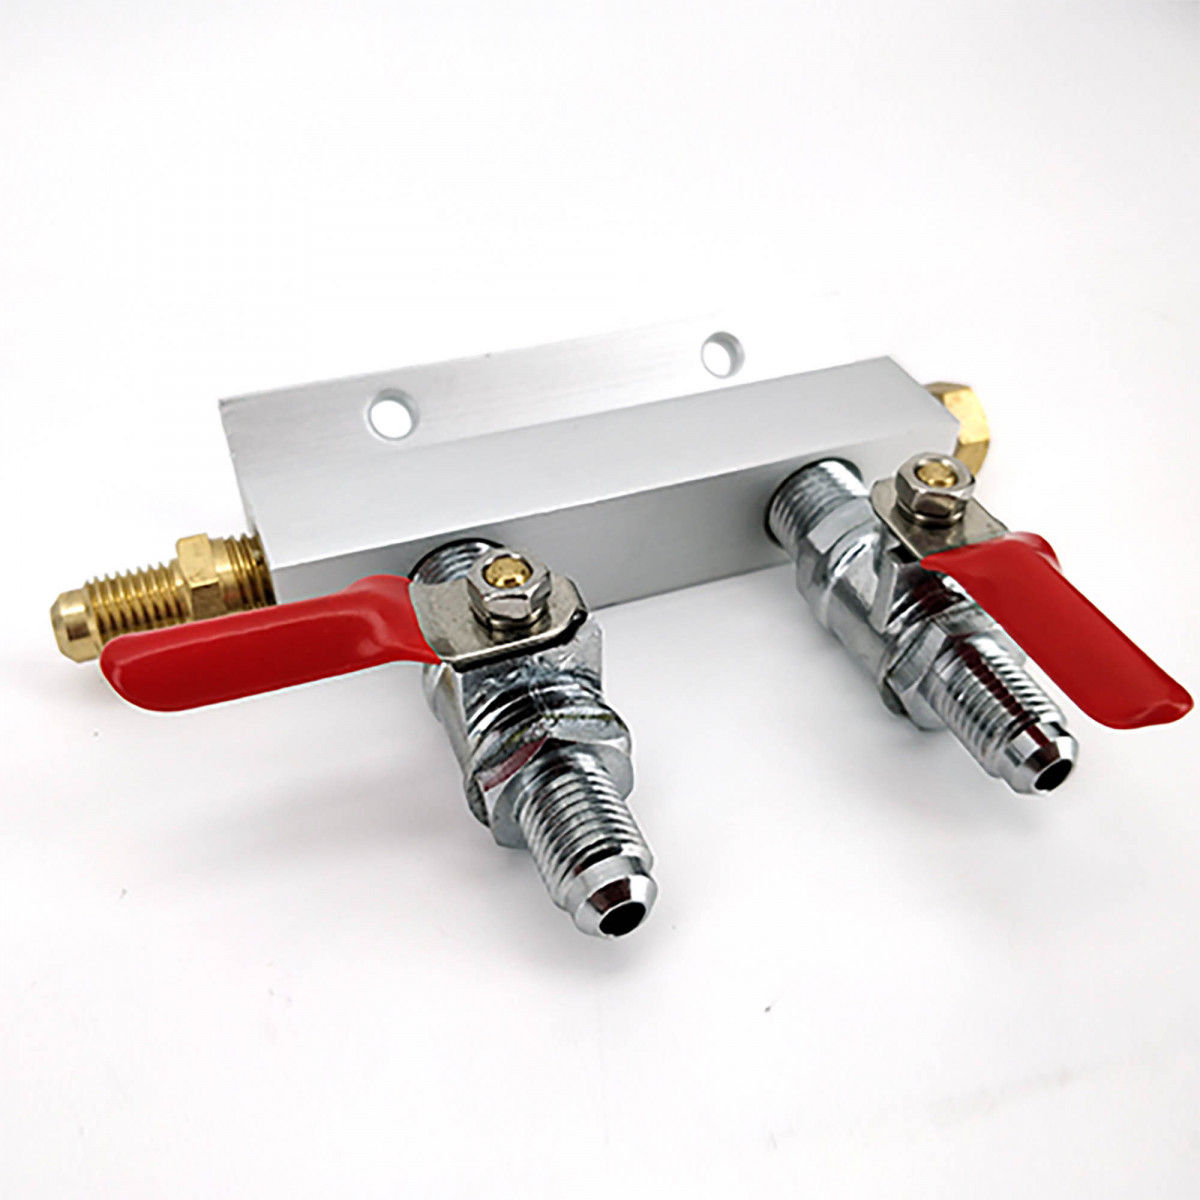 Duotight  two-way manifold gas line splitter 1/4" MFL with 2 outputs to 7/16 MFL